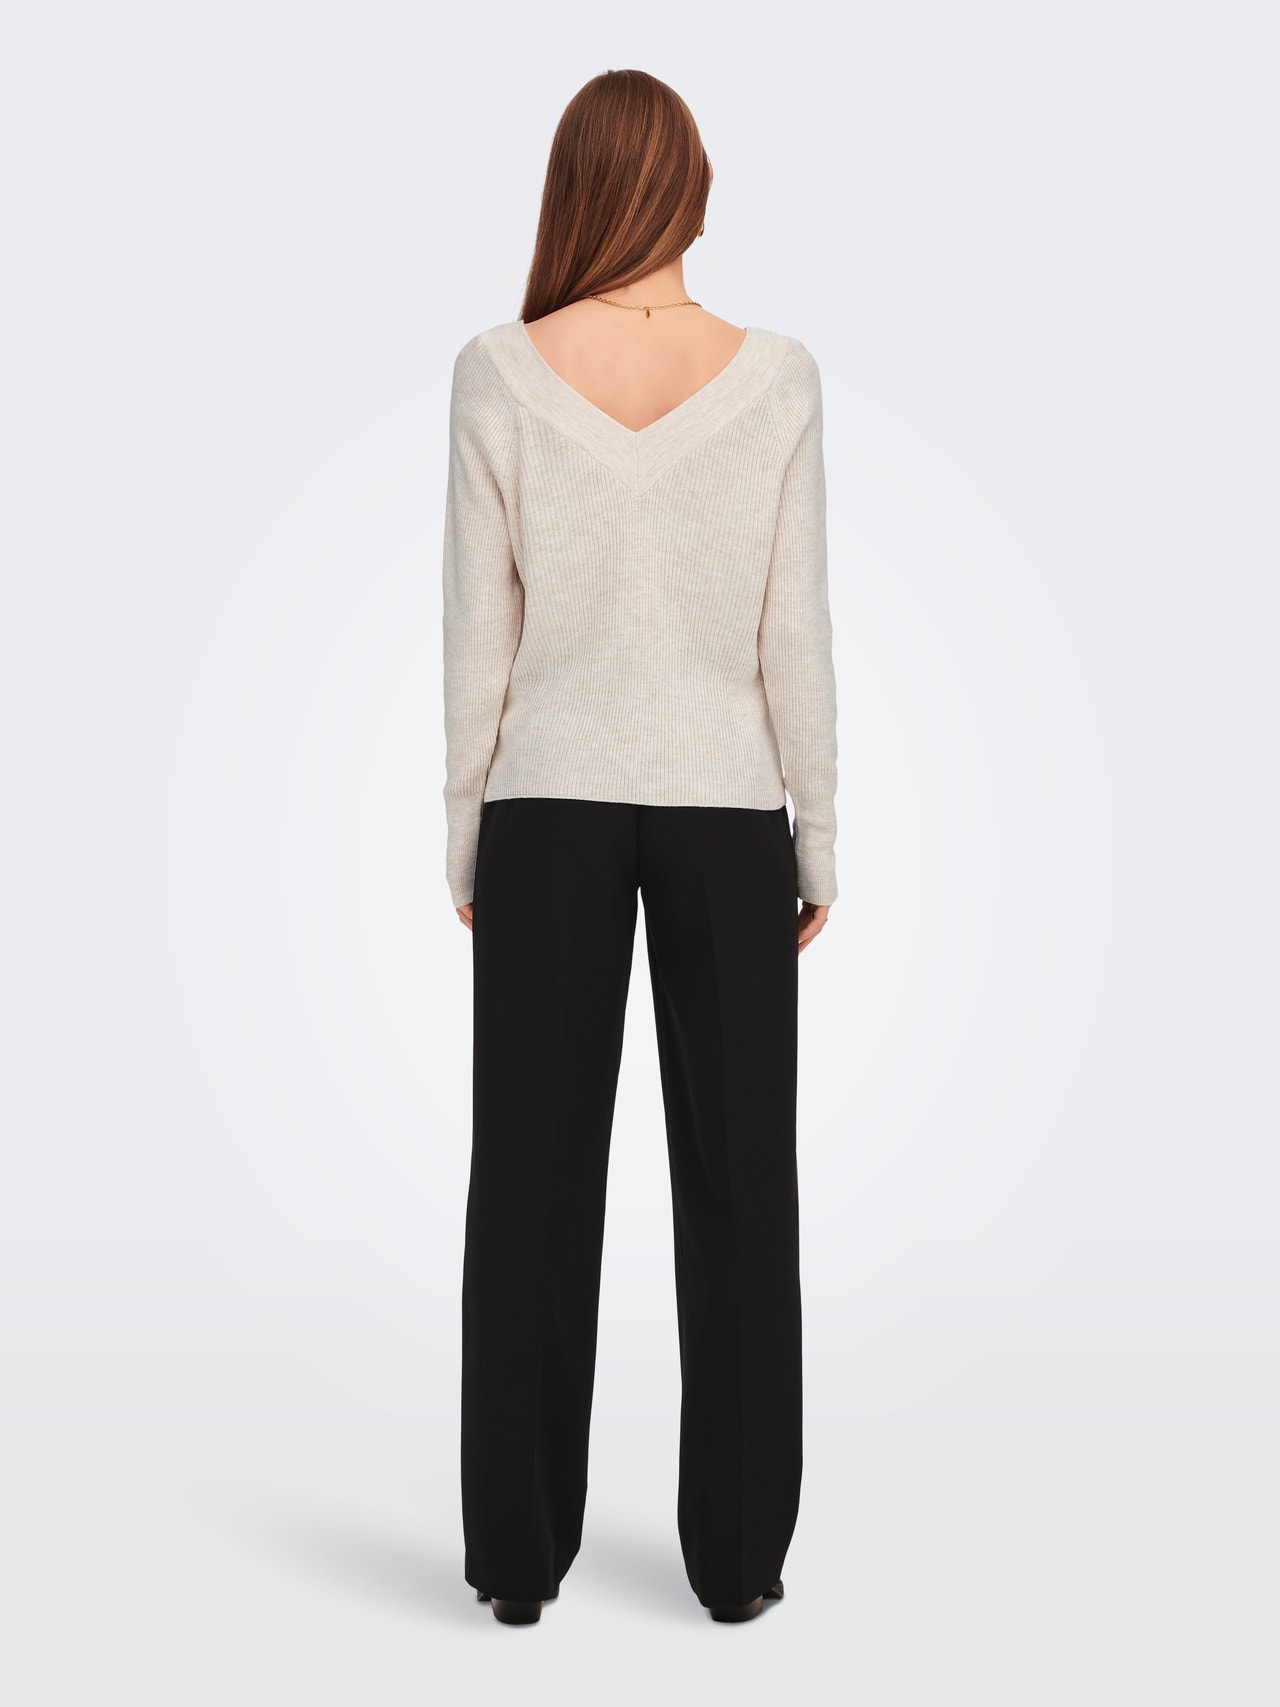 ONLY Pull-overs Col en V -Pumice Stone - 15268801